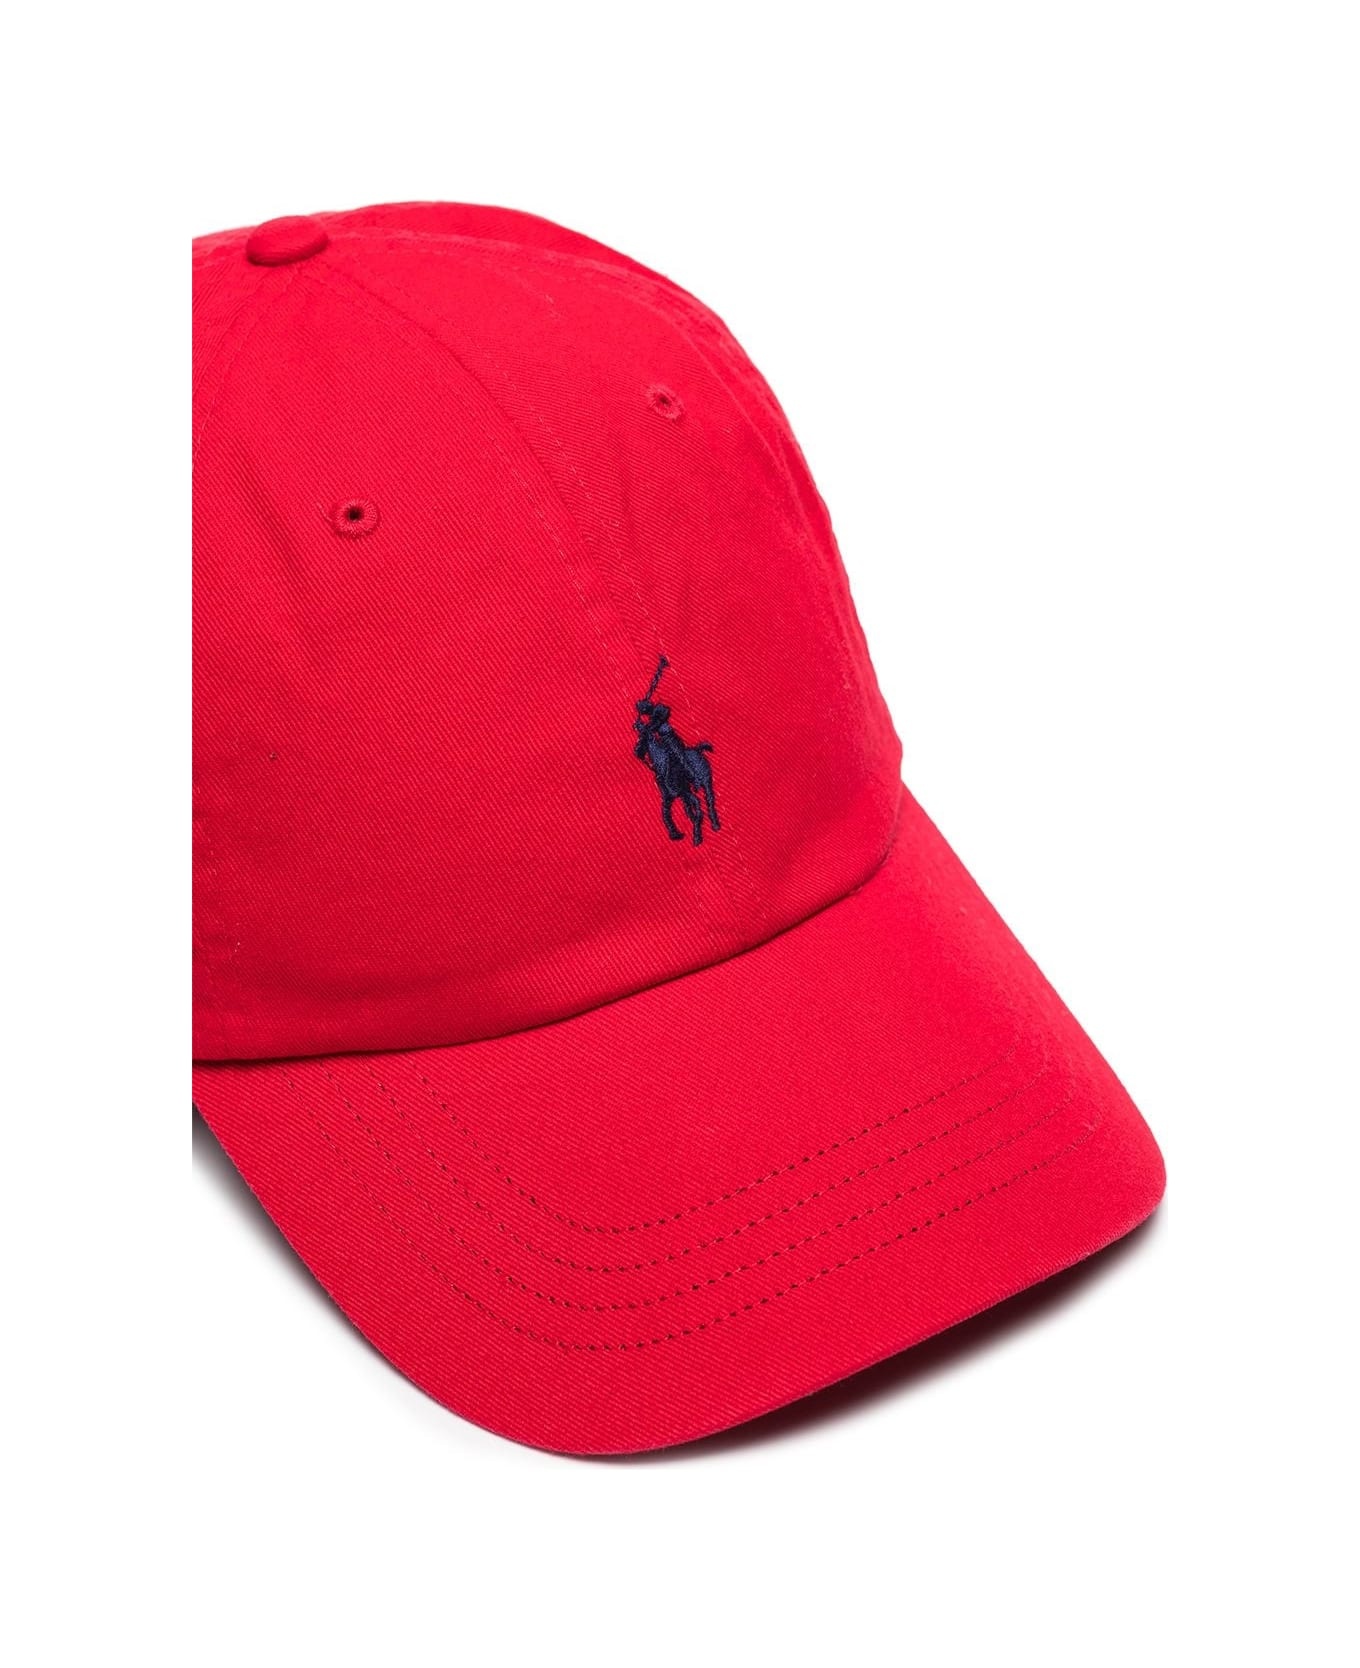 Red Baseball Hat With Blue Pony - 4